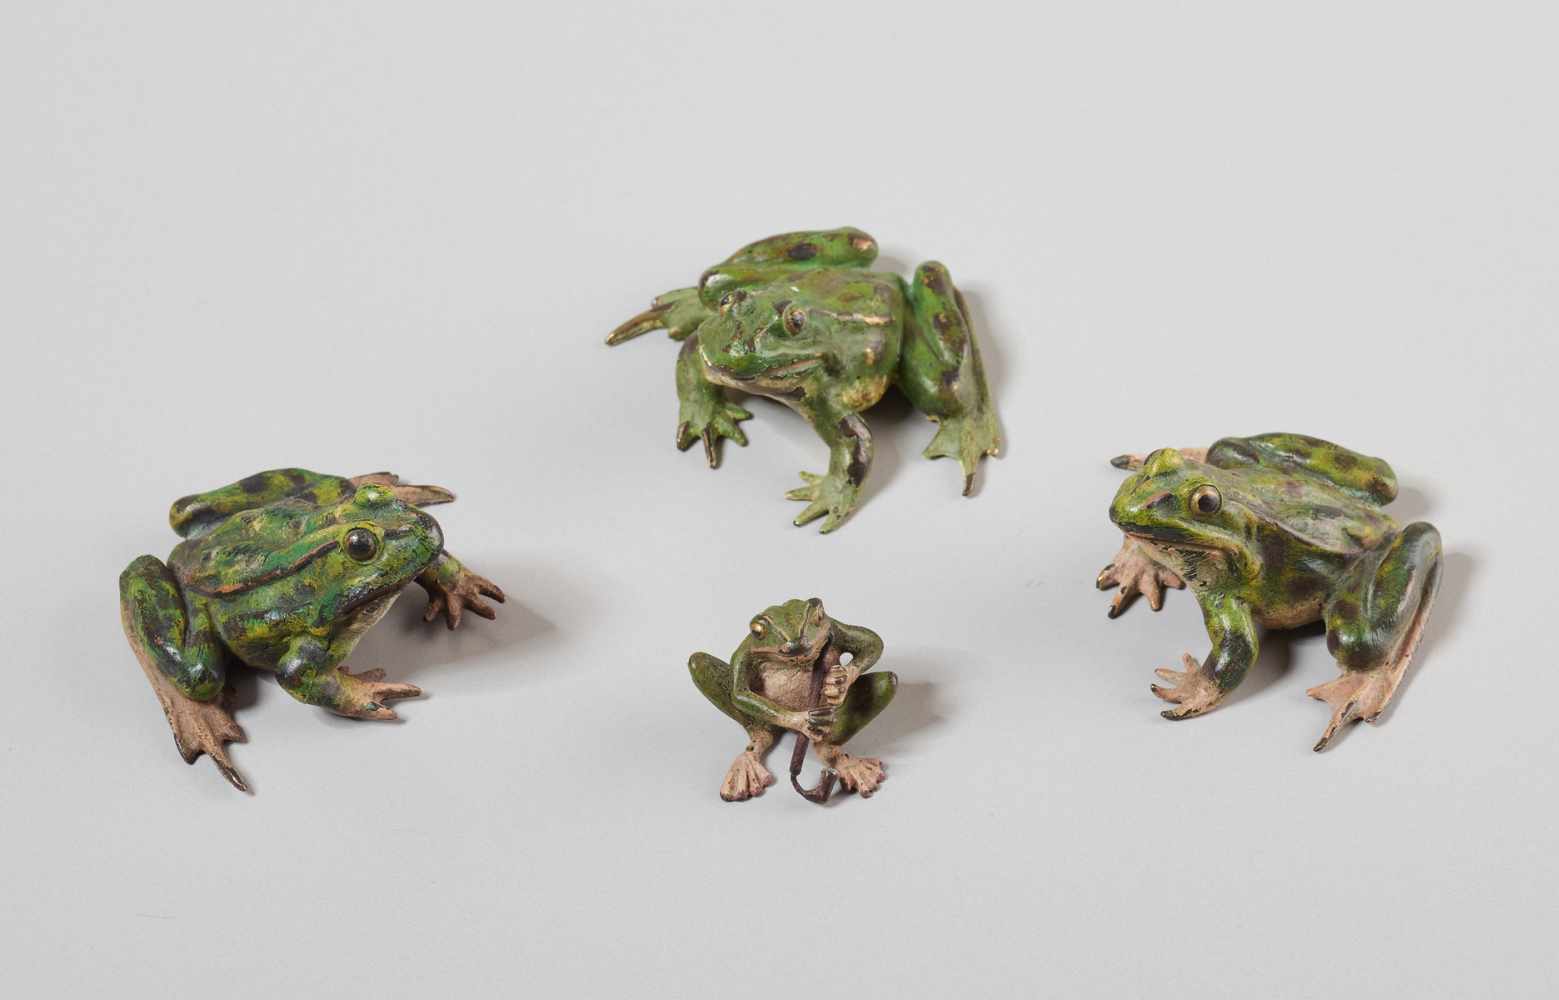 VIENNA BRONZE, GROUP WITH FOUR FROG FIGURES, 1920sCompany of Franz Xaver Bergmann (1861-1936)